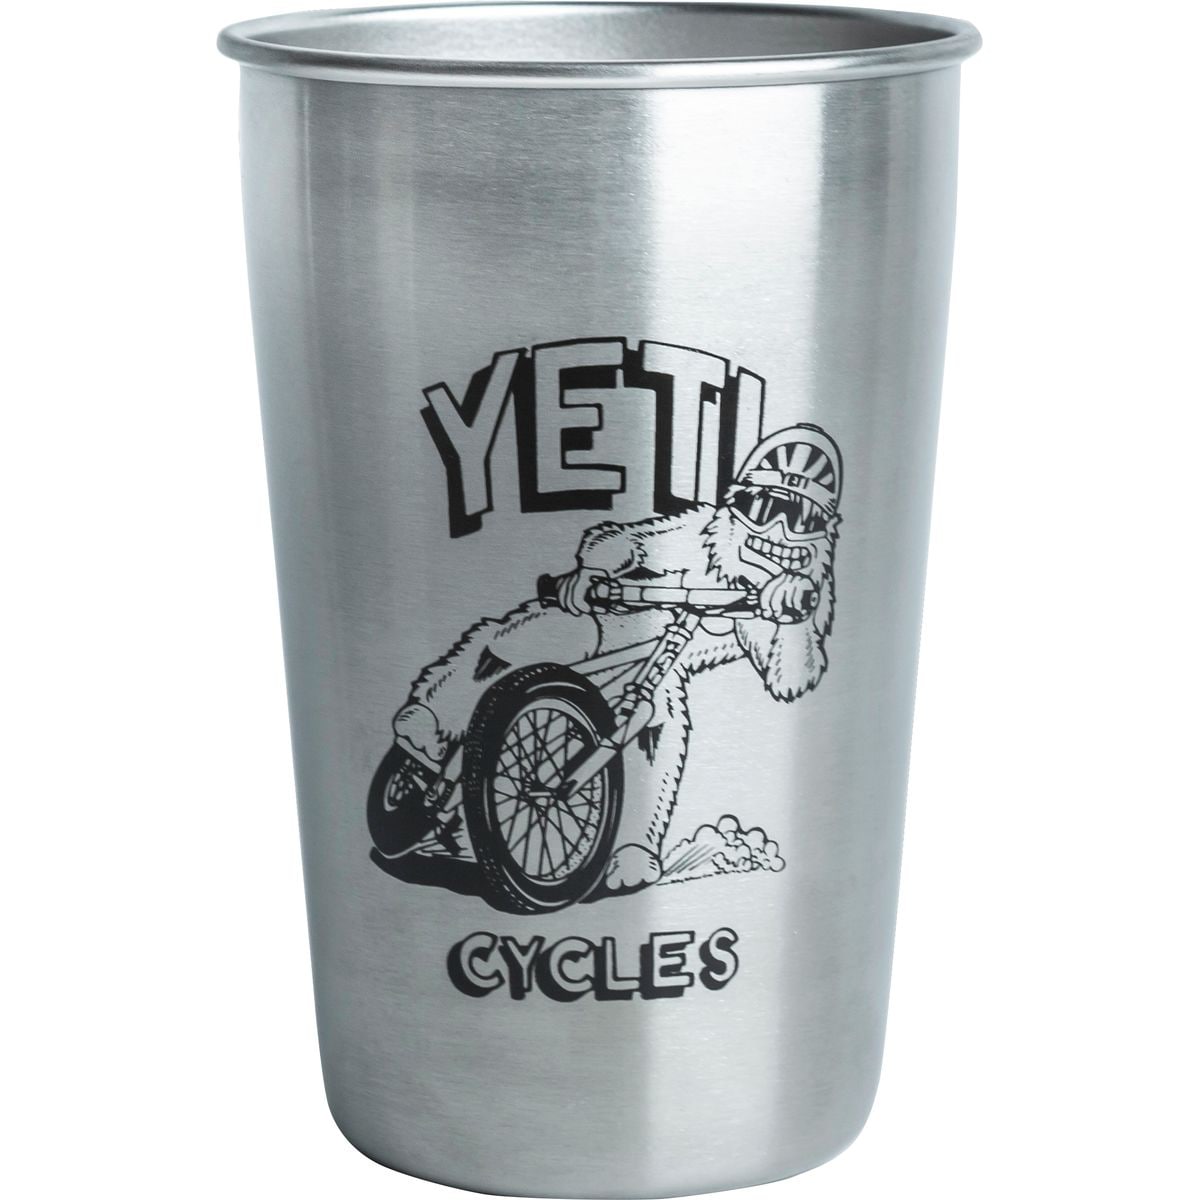 Yeti Cycles Stainless Pint Cup